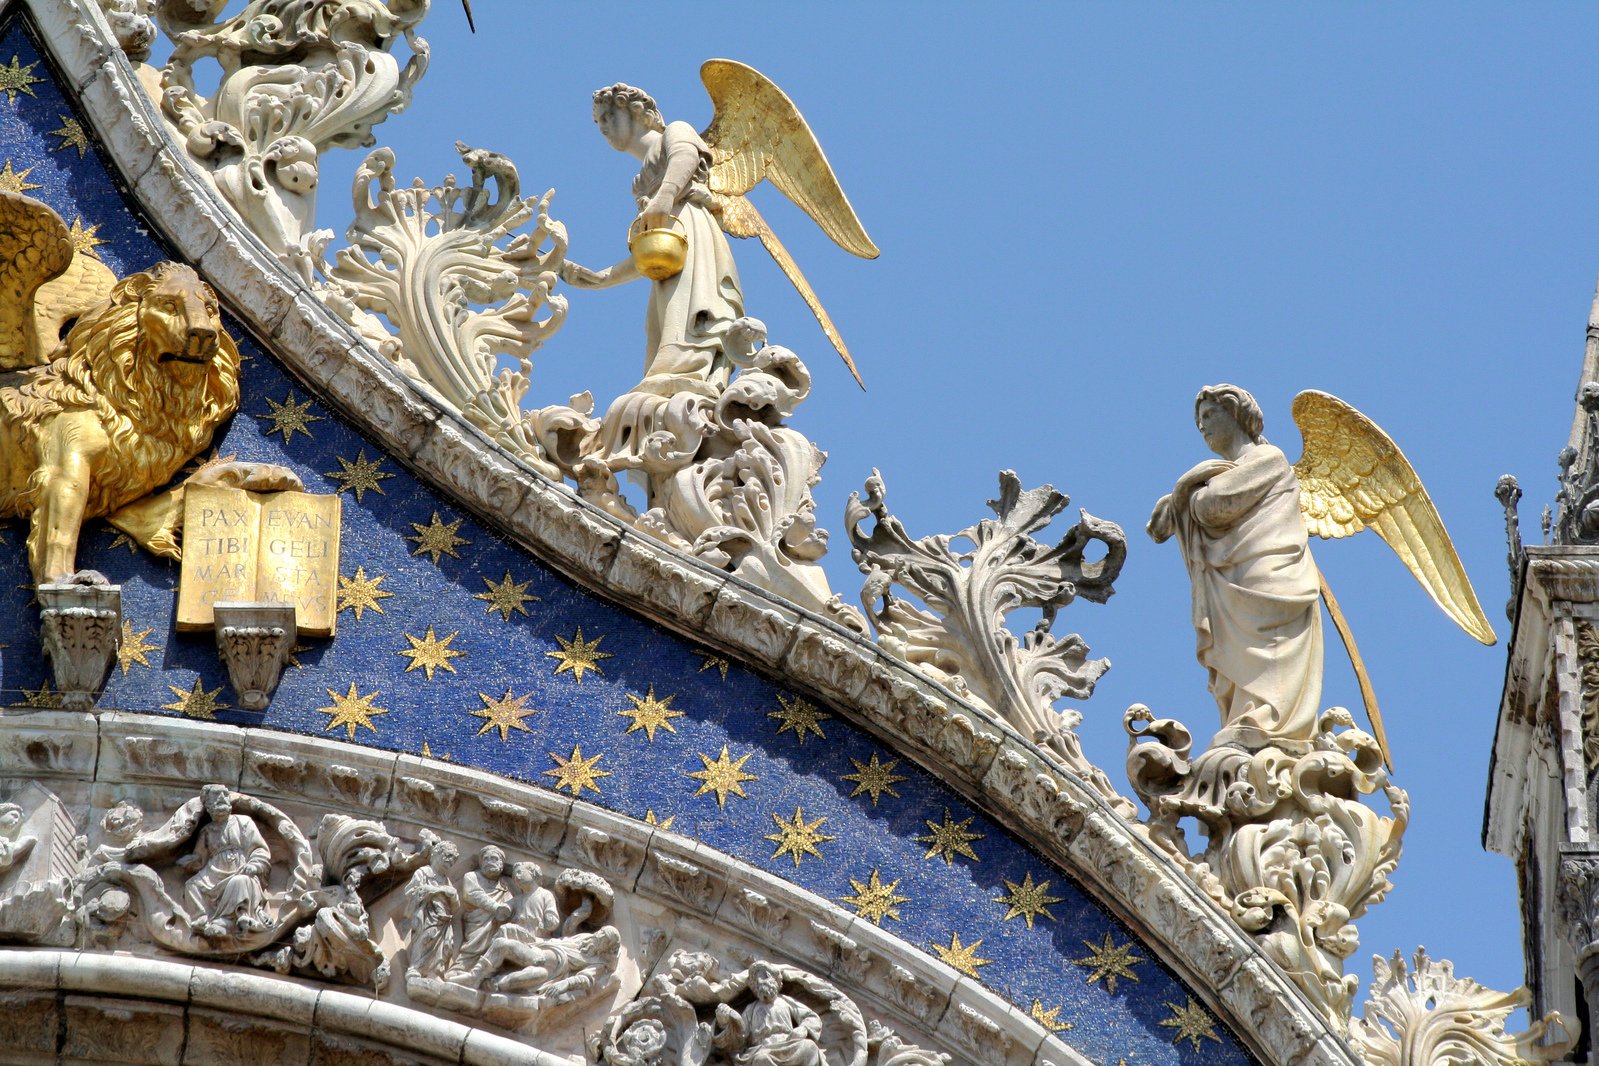 the top of an architectural structure is decorated with angel figurines